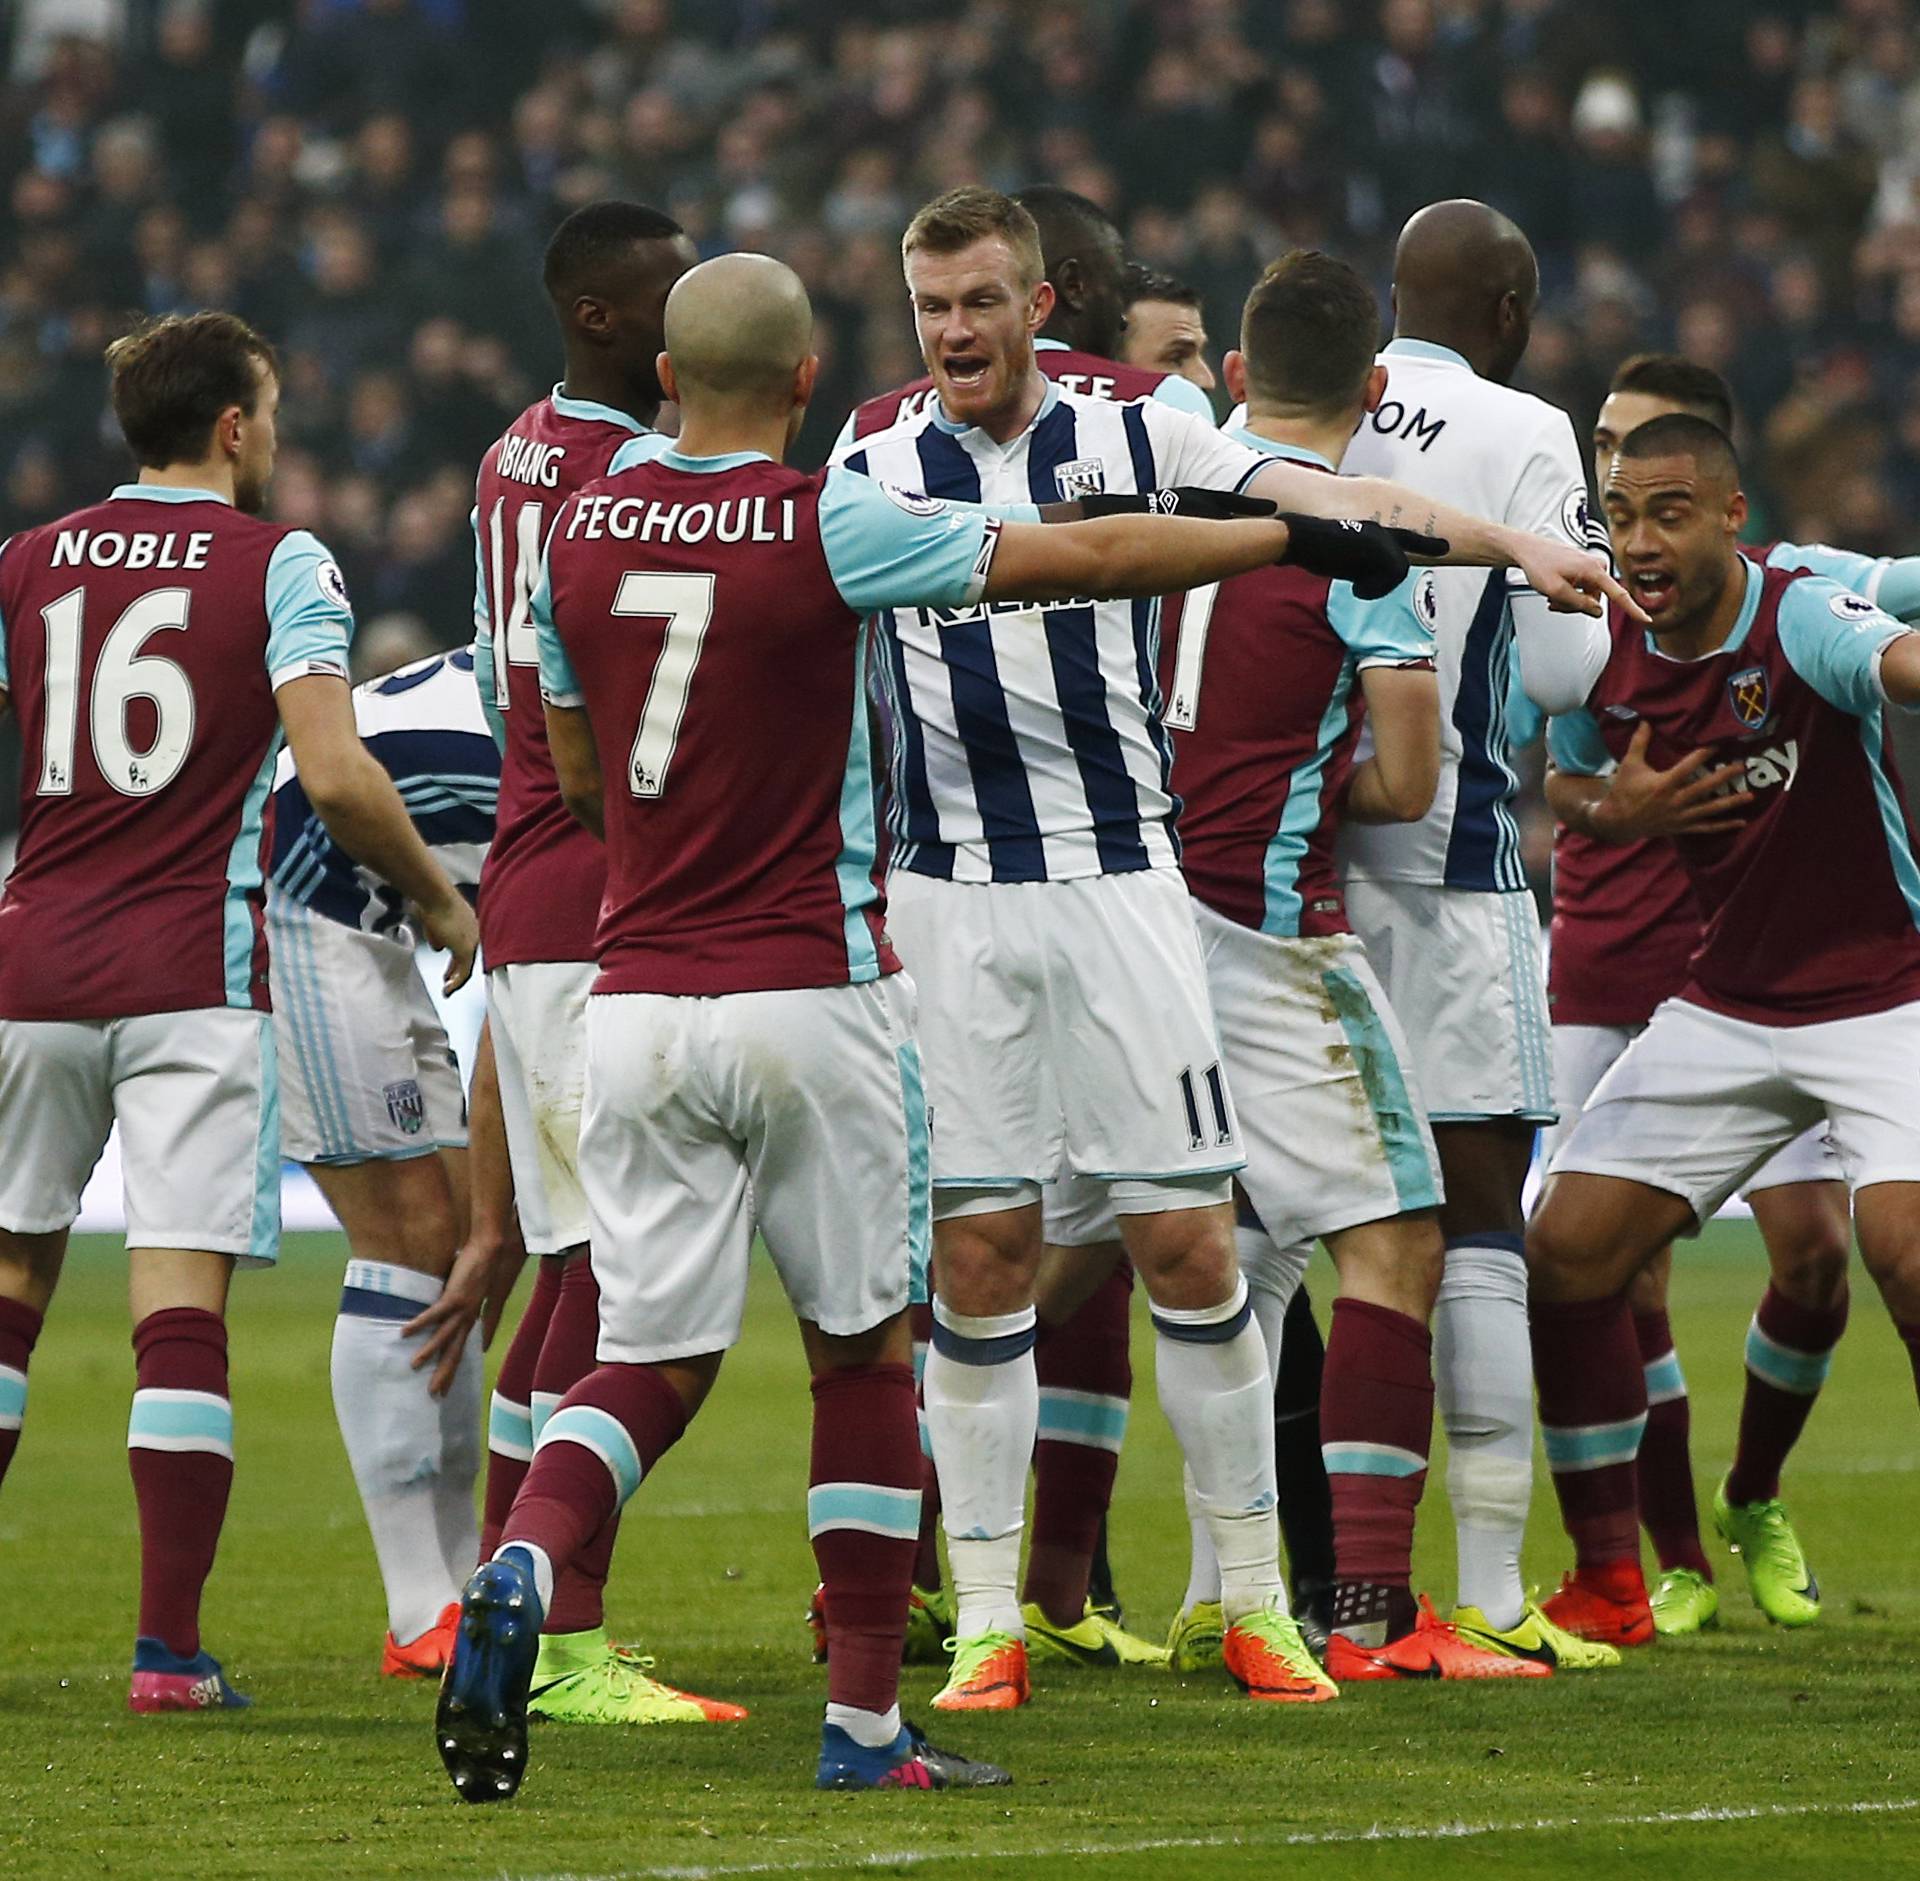 West Bromwich Albion's players and West Ham United's players appeal to referee Michael Oliver after West Ham United's Sofiane Feghouli scores a disallowed goal